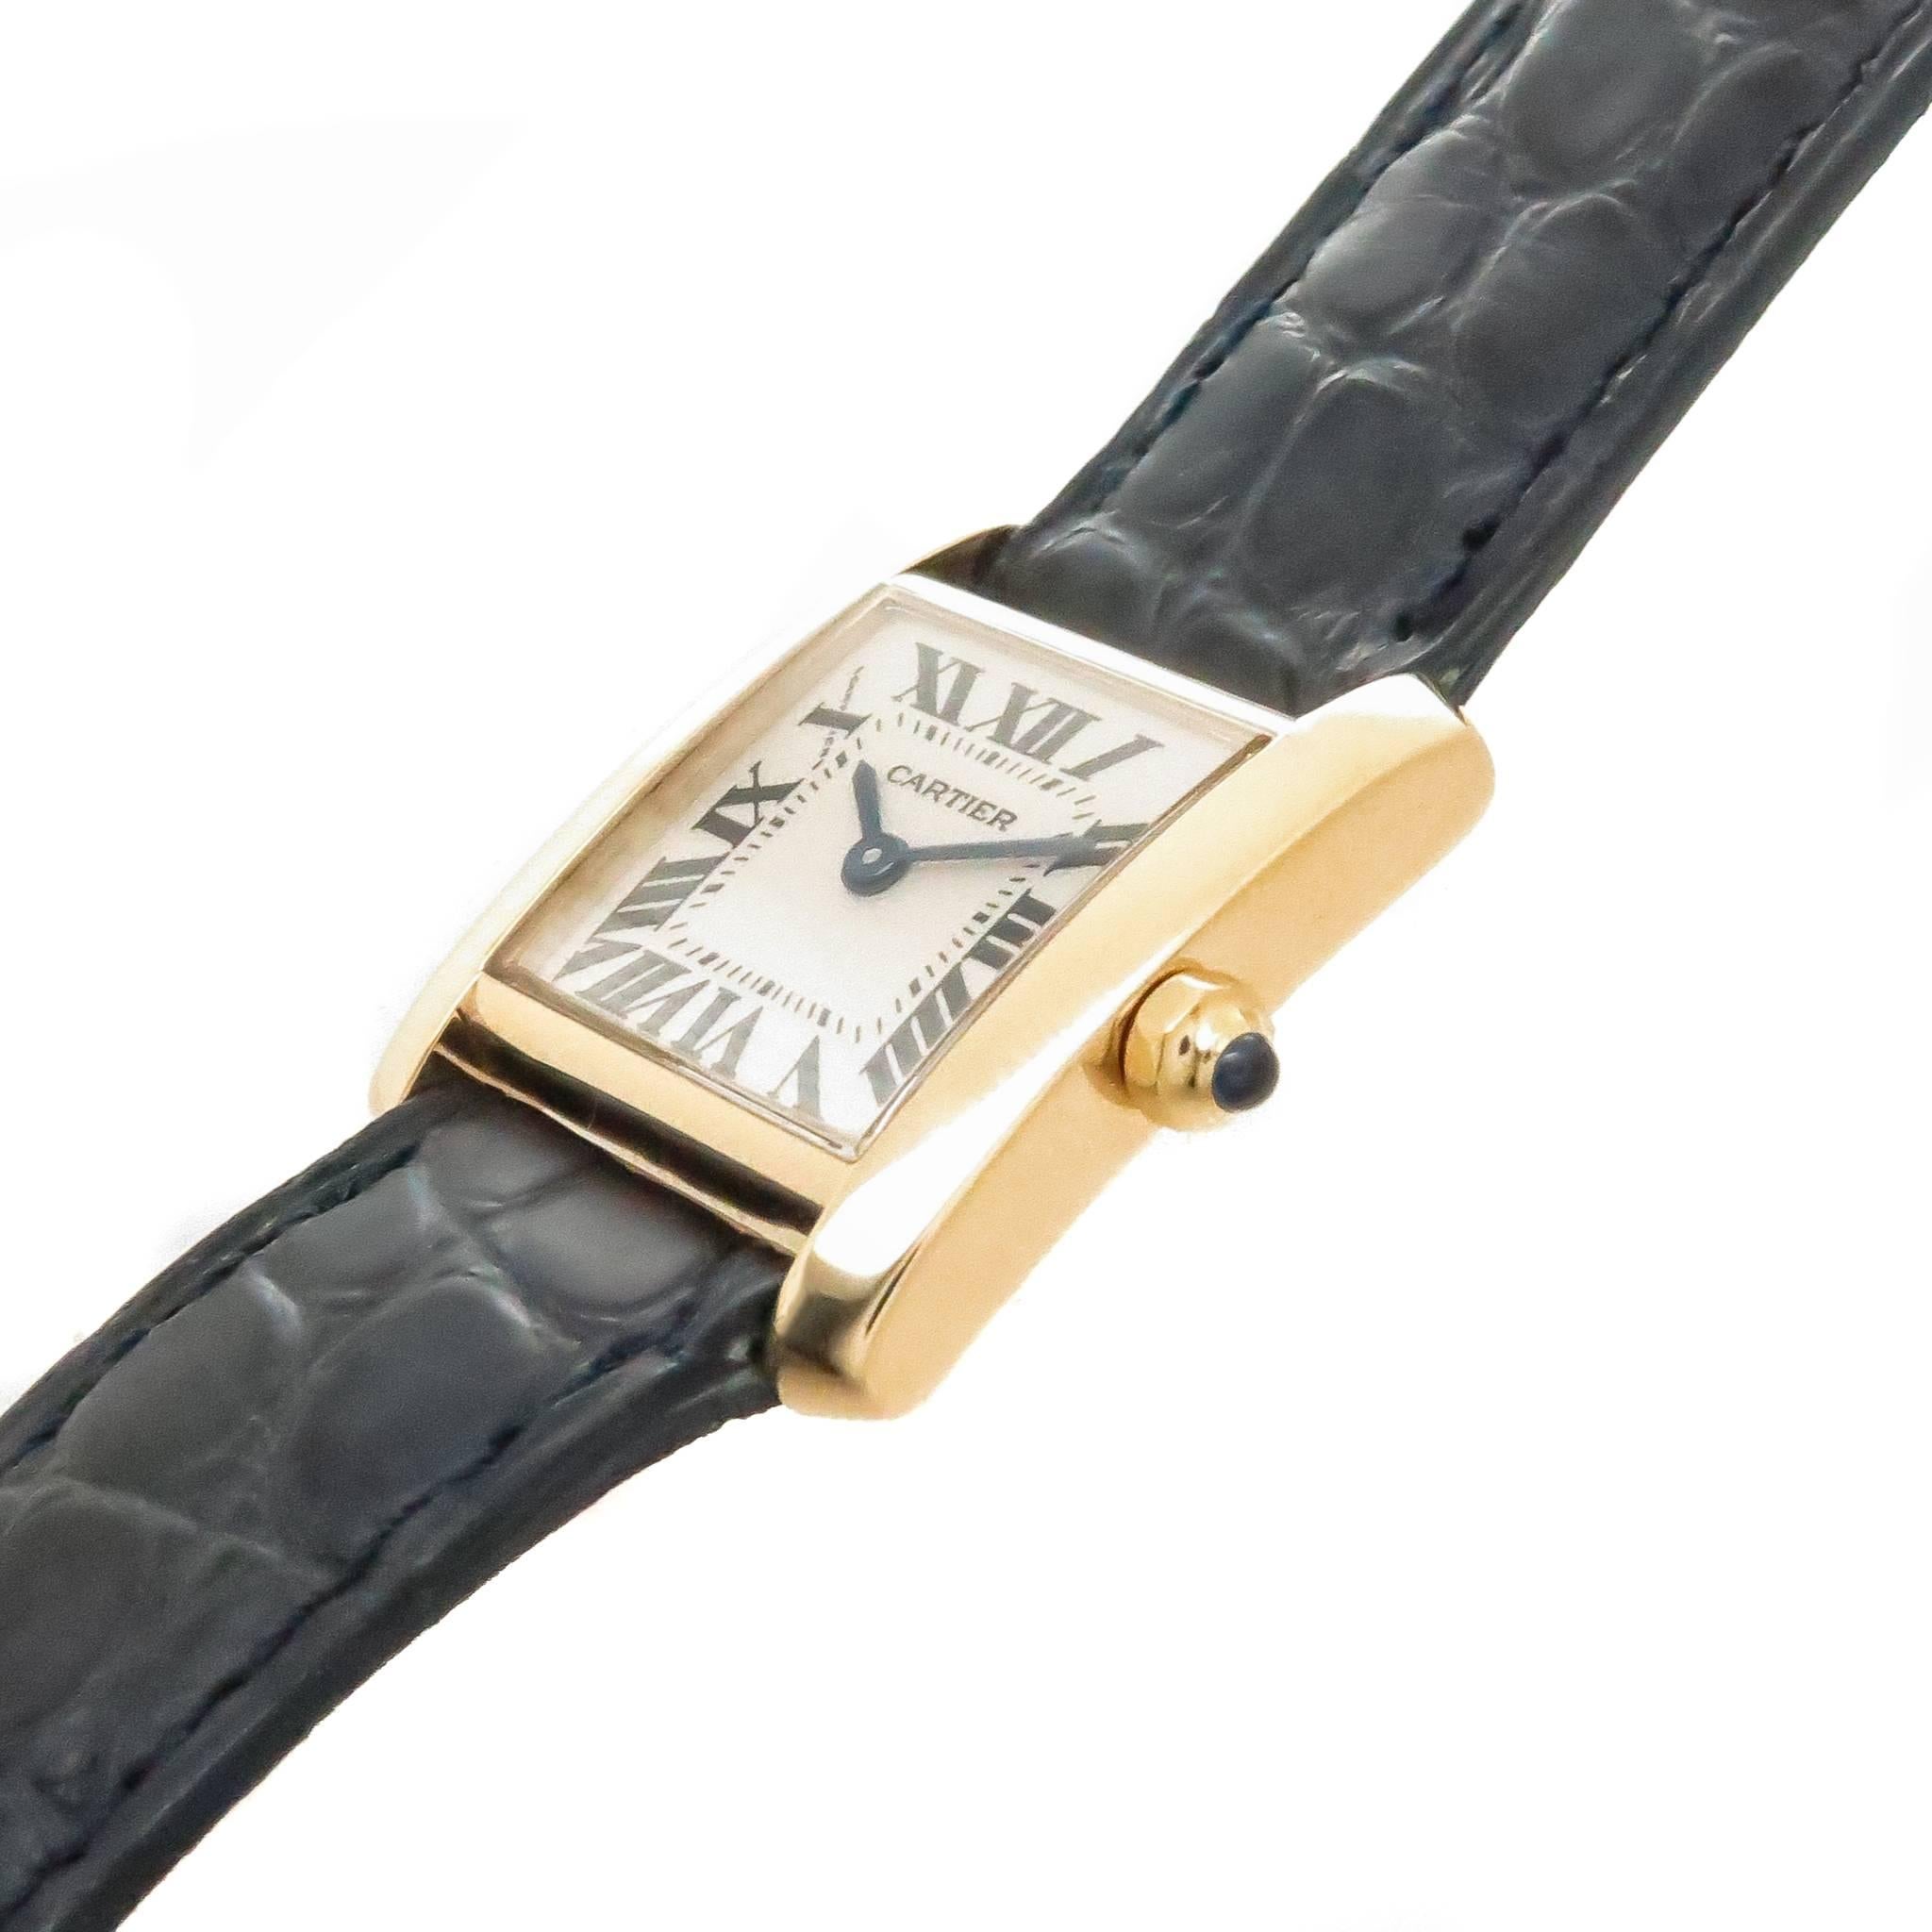 Circa 2012 Cartier Ladies Tank Francaise Wrist Watch, 25 X 20 MM 18K Yellow Gold case, Quartz Movement, White Dial with Black Roman Numerals, sapphire Crown.  New Cartier Navy Blue Croco strap with 18K Gold Tang Buckle. Watch length 8 3/4 inches.